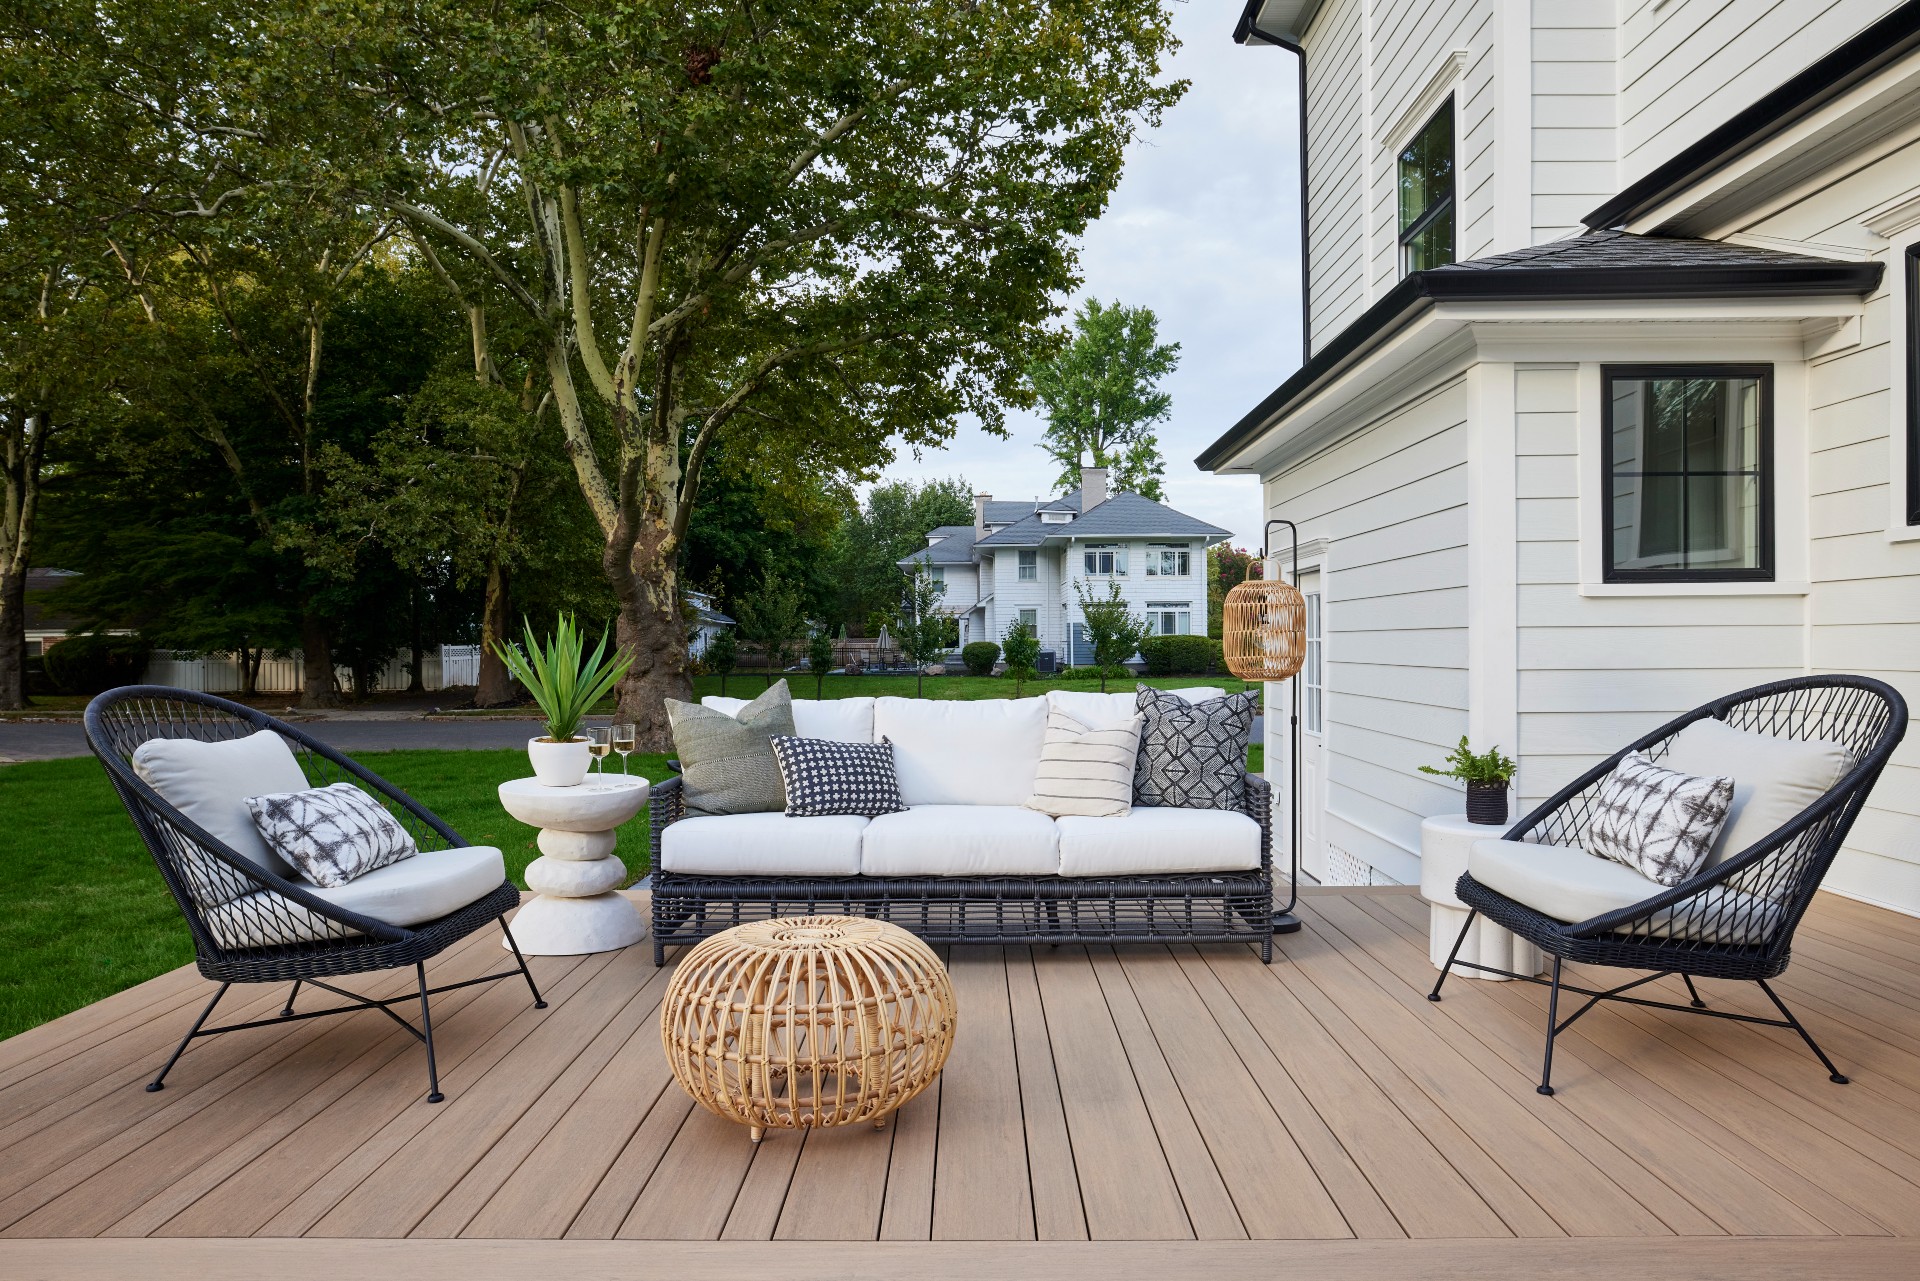 How much does a deck cost? These are the deck costs you need to know